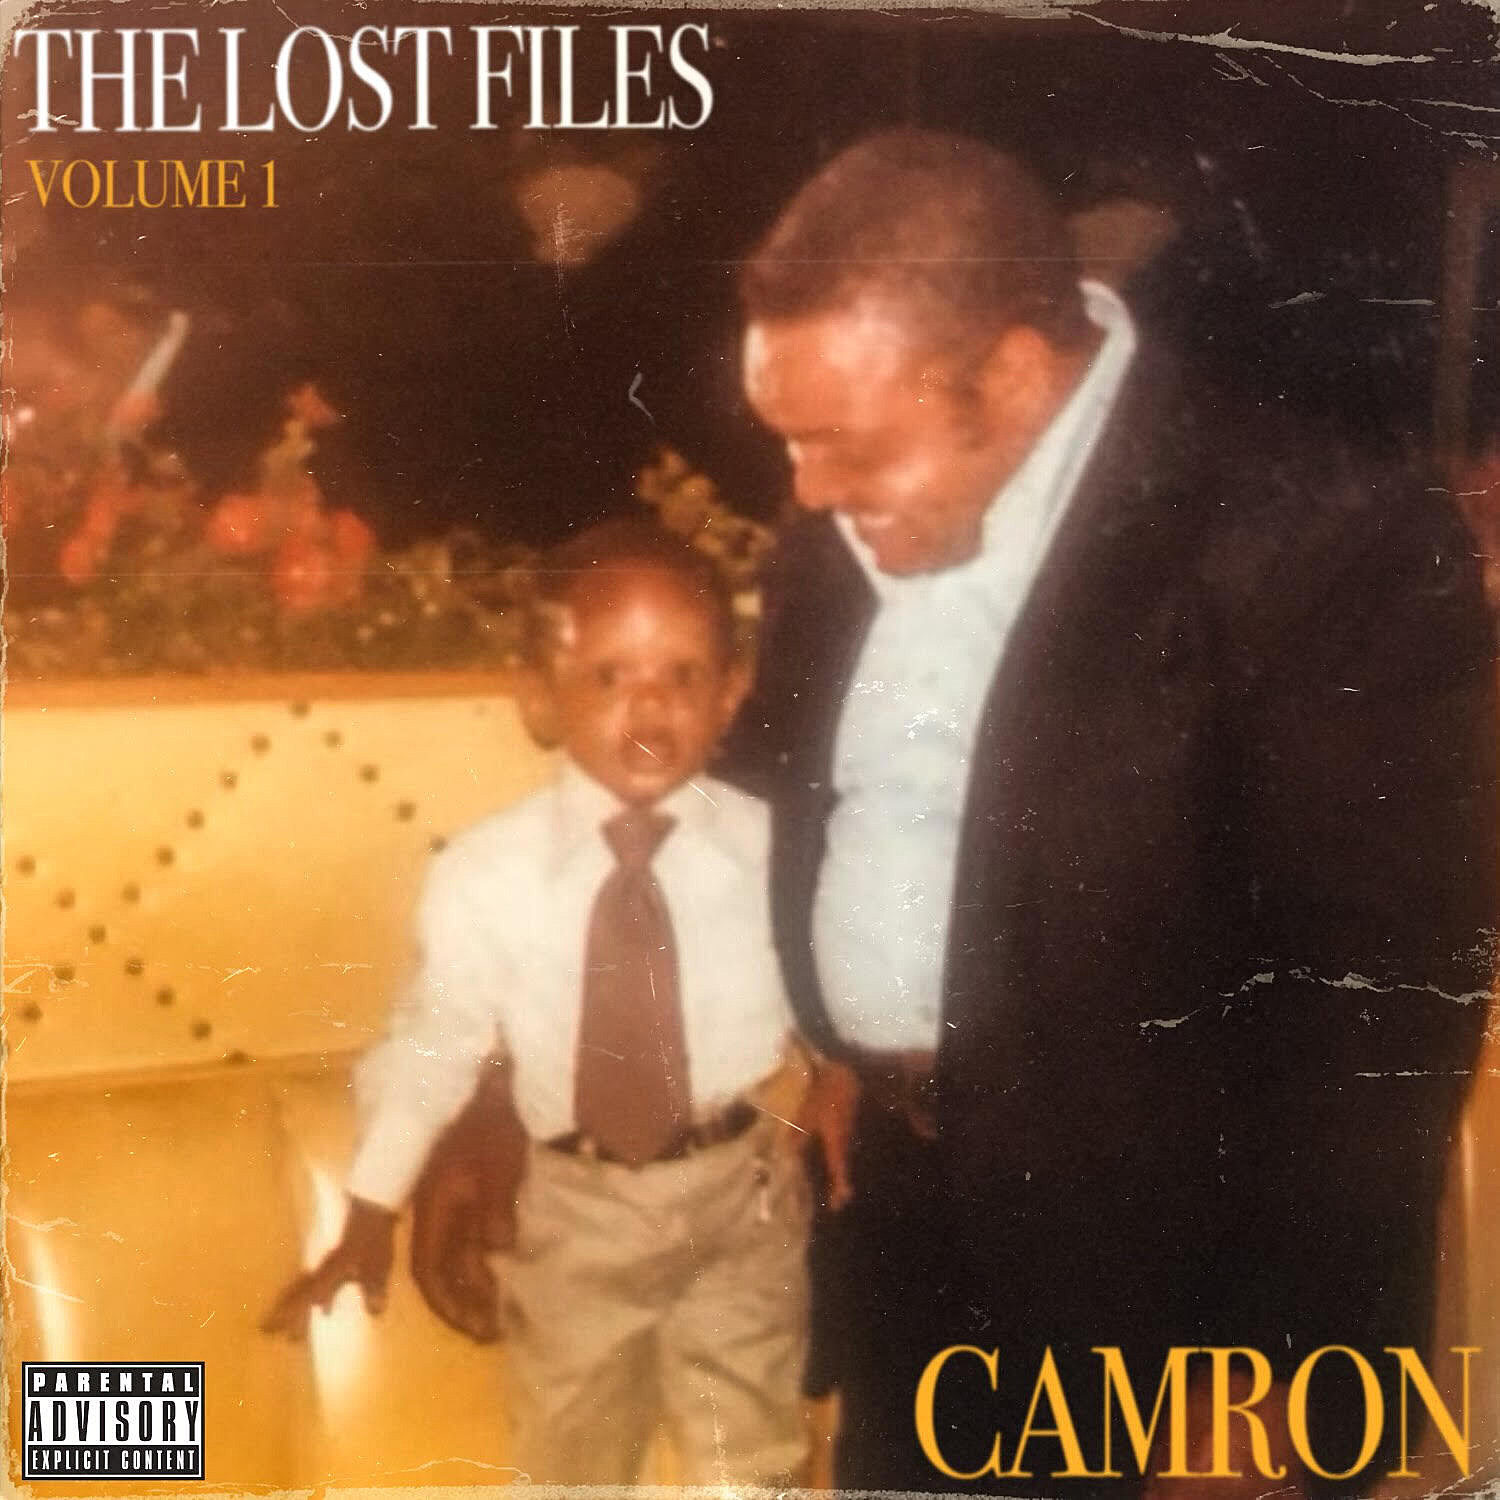 Cam'ron Returns with New Mixtape, The Lost Files Vol. 1